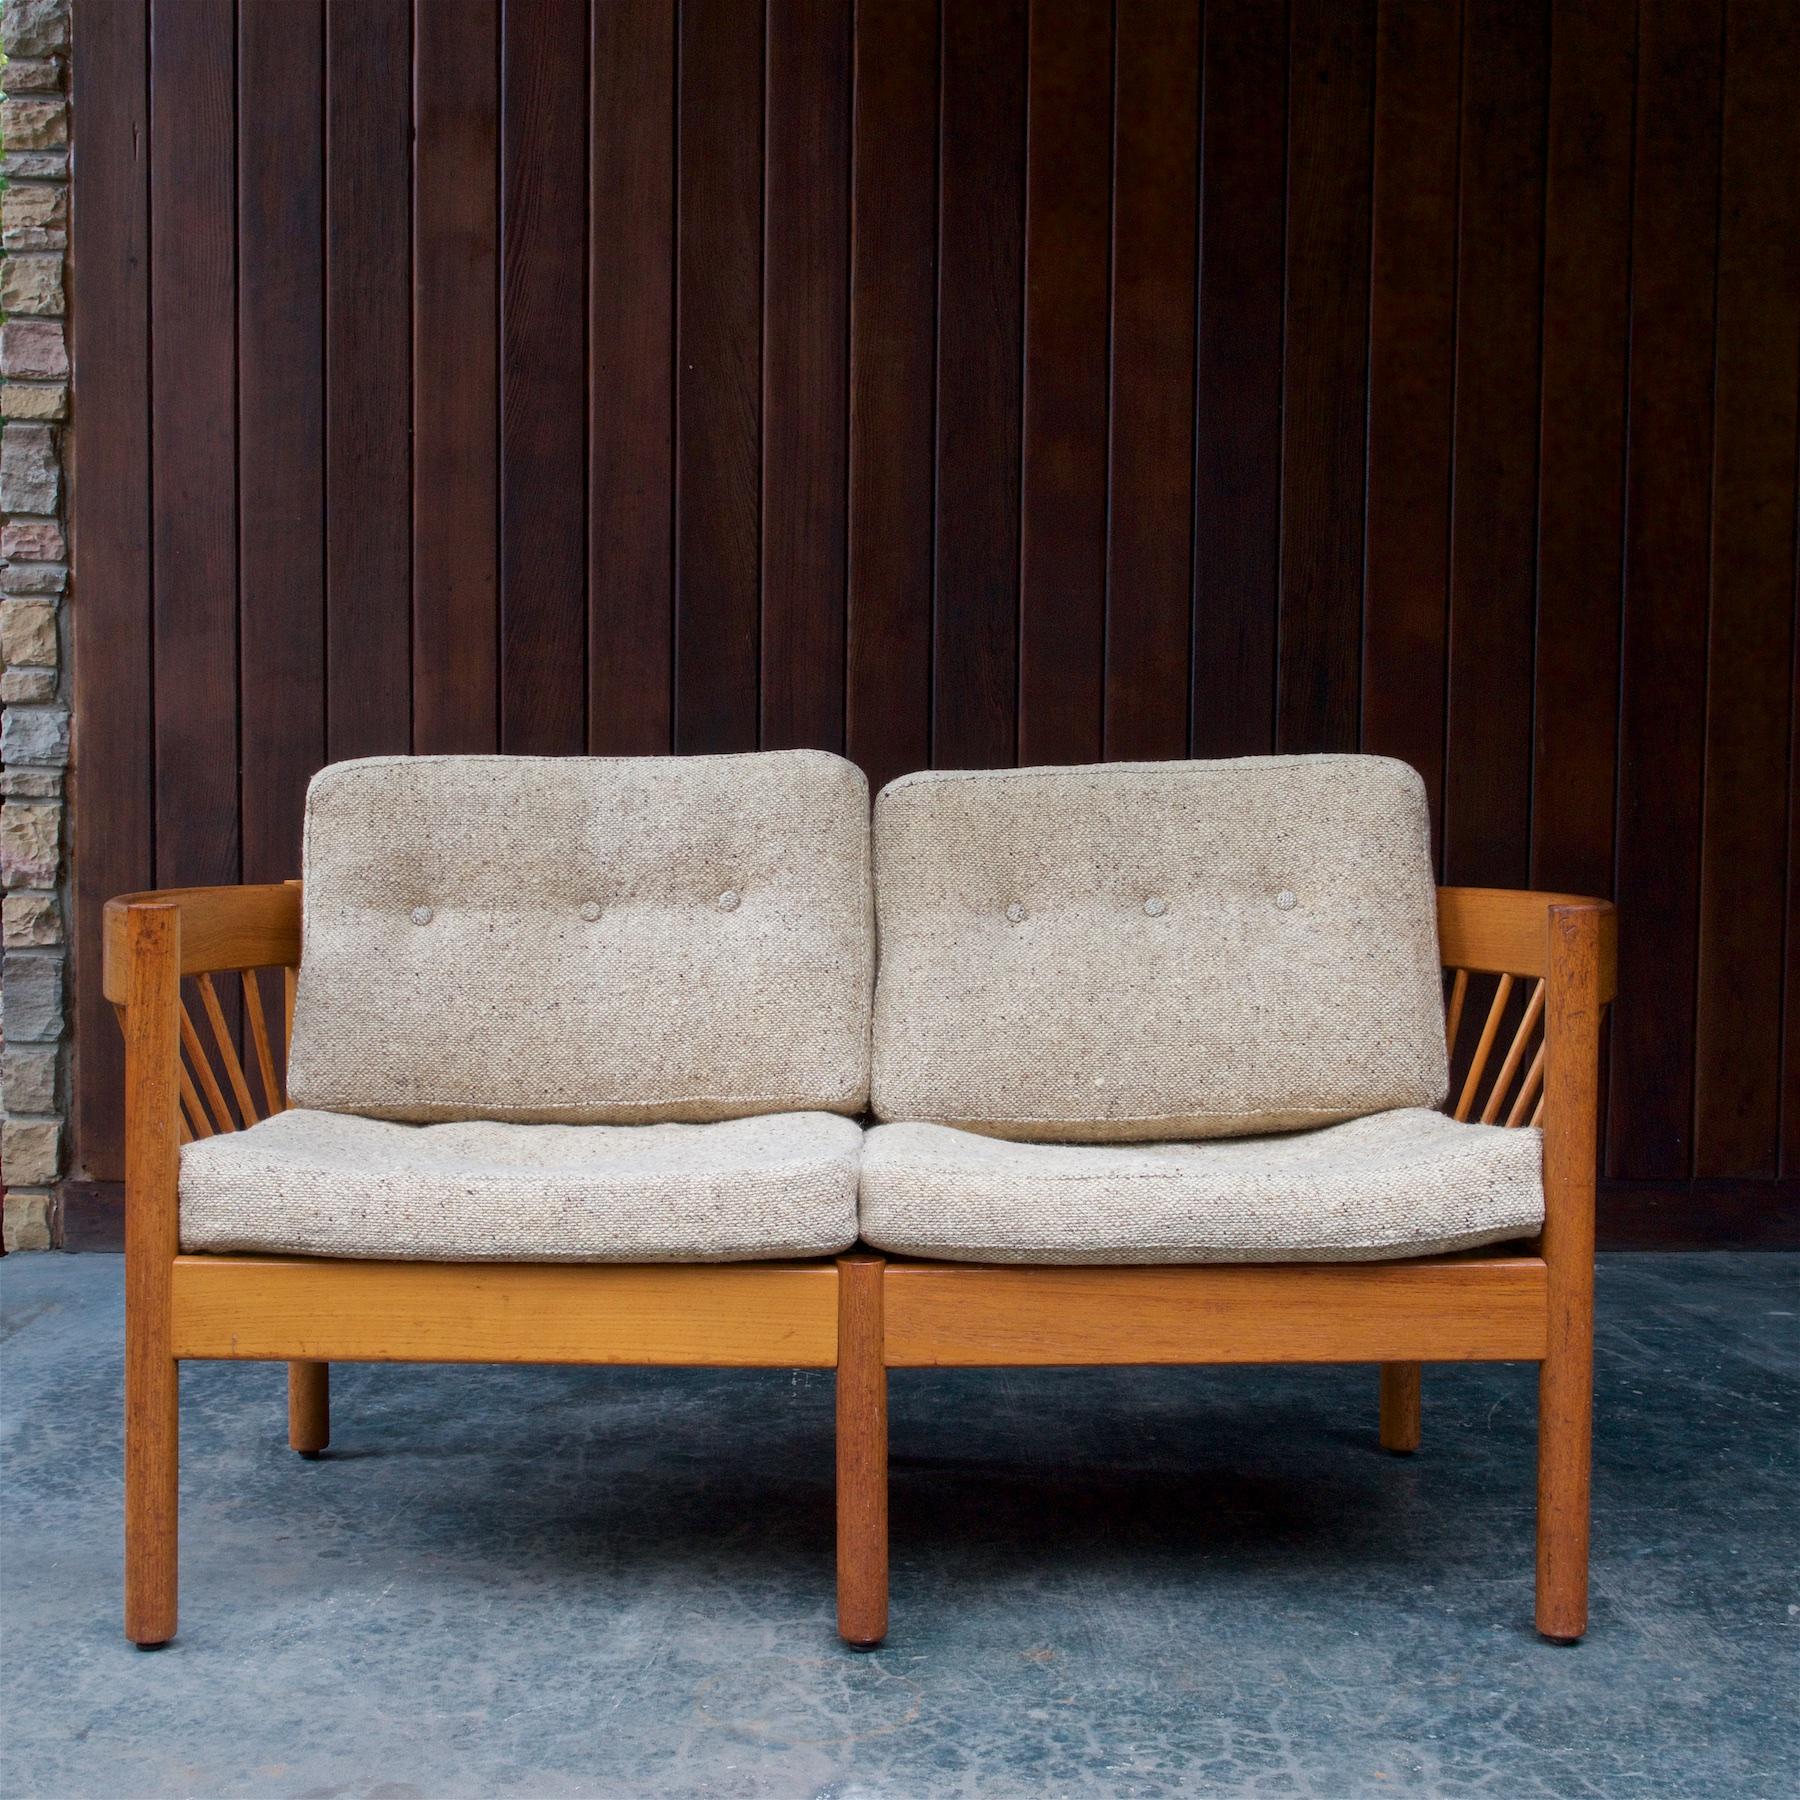 The sofa frame is strong, and without looseness, with a wonderful time worn patina. Original fabric cleaned with new foam inserted. Very comfortable, and the cushion webbing on the frame is holding fine.

The architect Jørgen Bækmark (1929) was